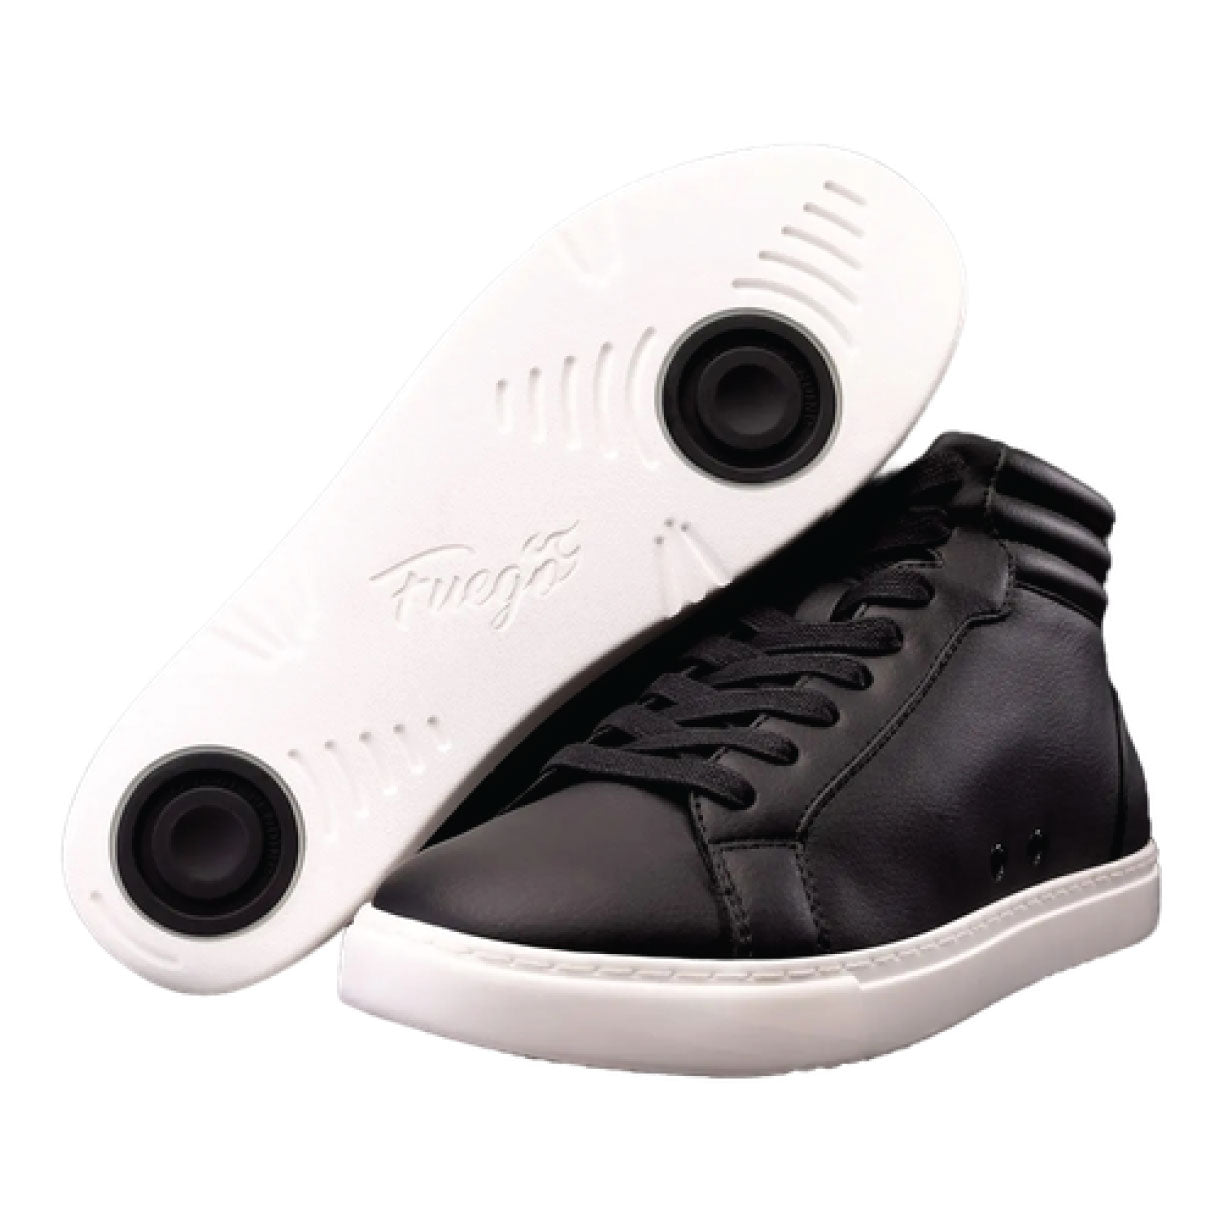 Fuego high top dance sneakers in black and white